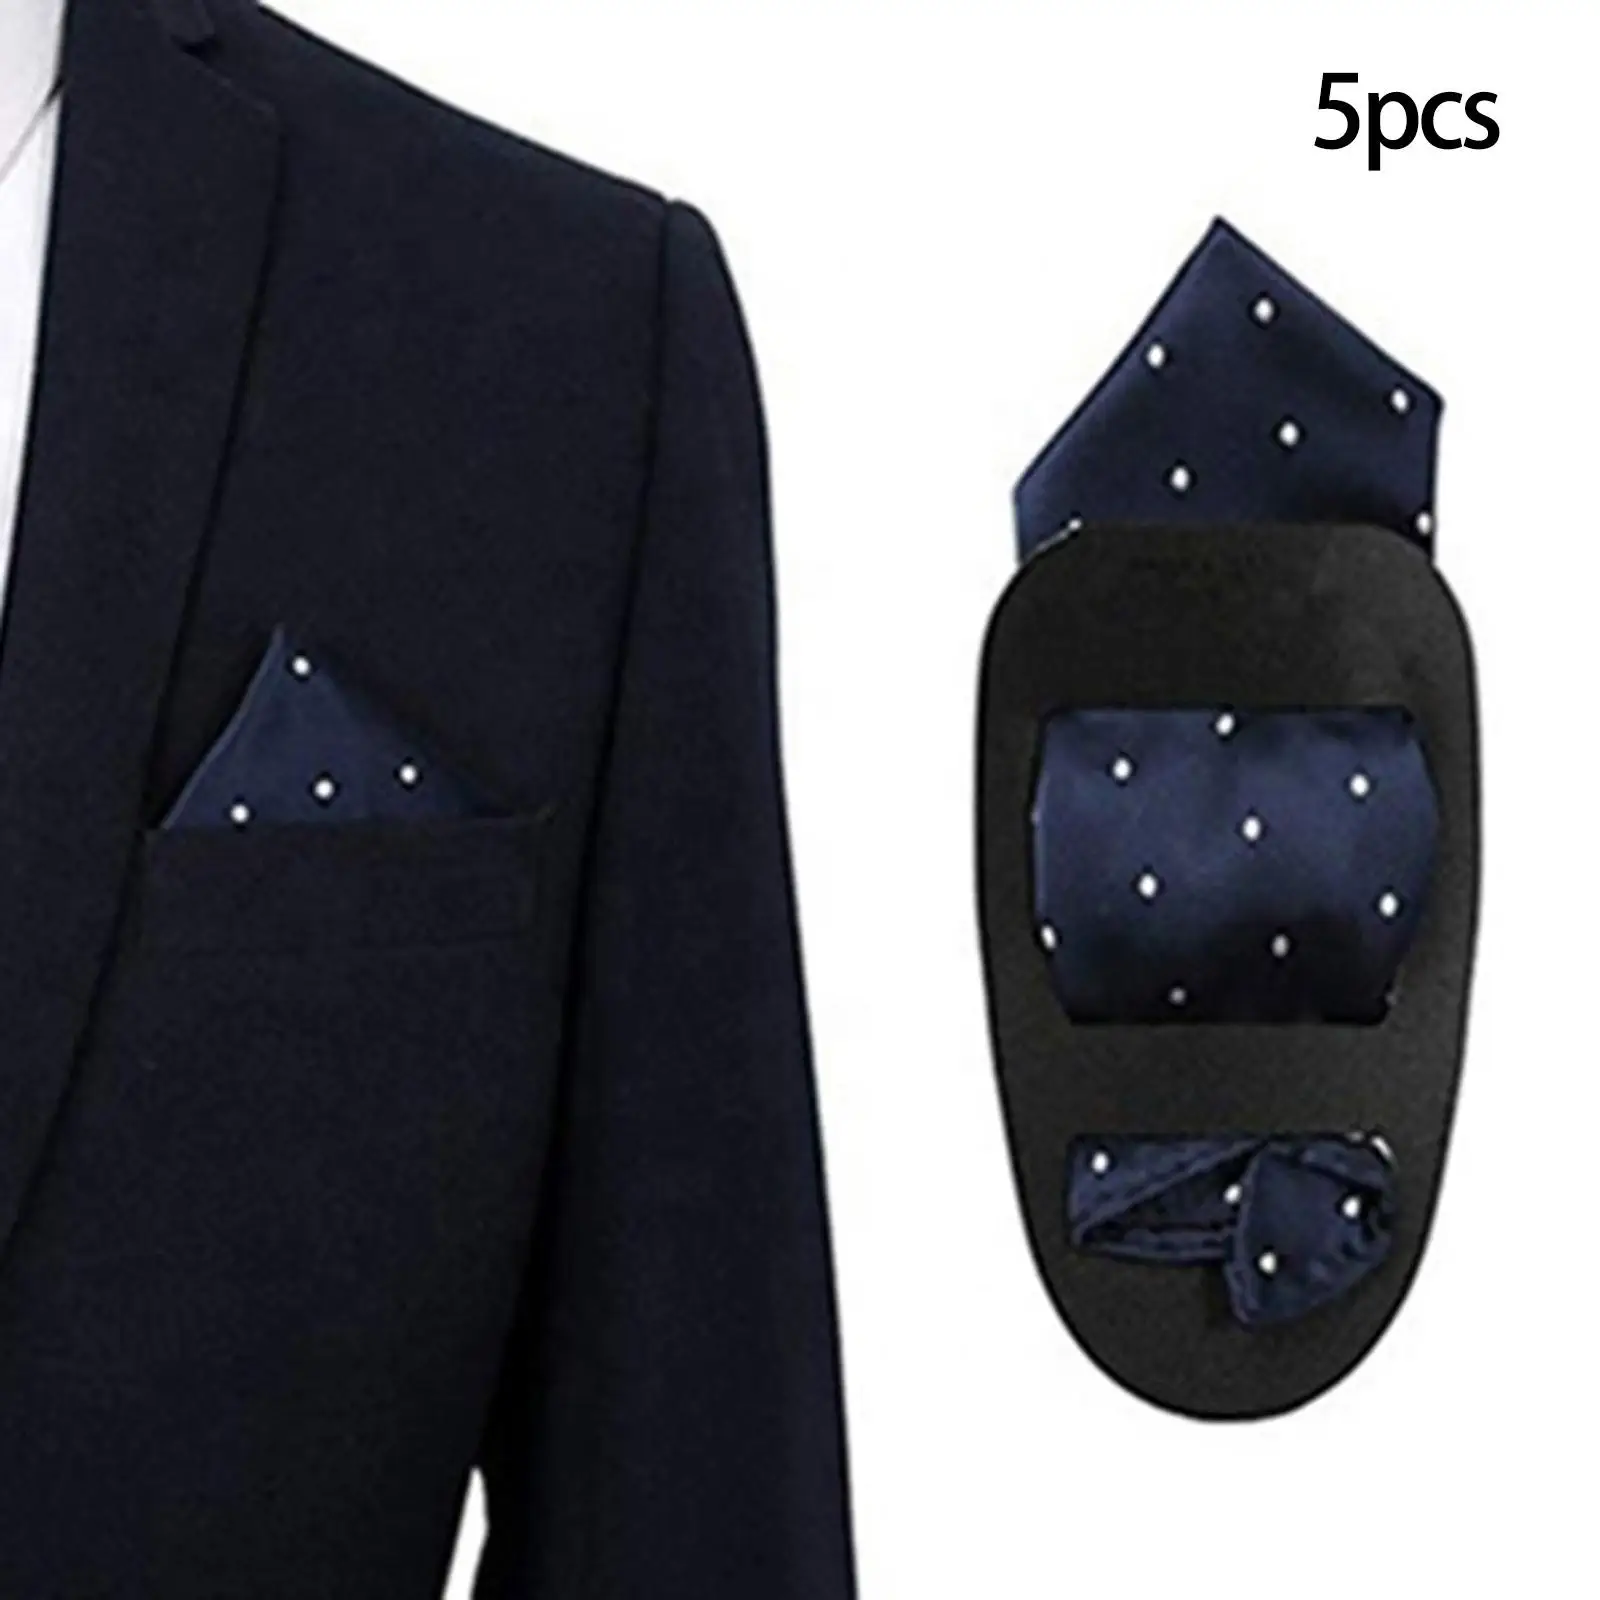 5 Pieces Pocket Square Holder Support Organizer for MenS suits Accessories